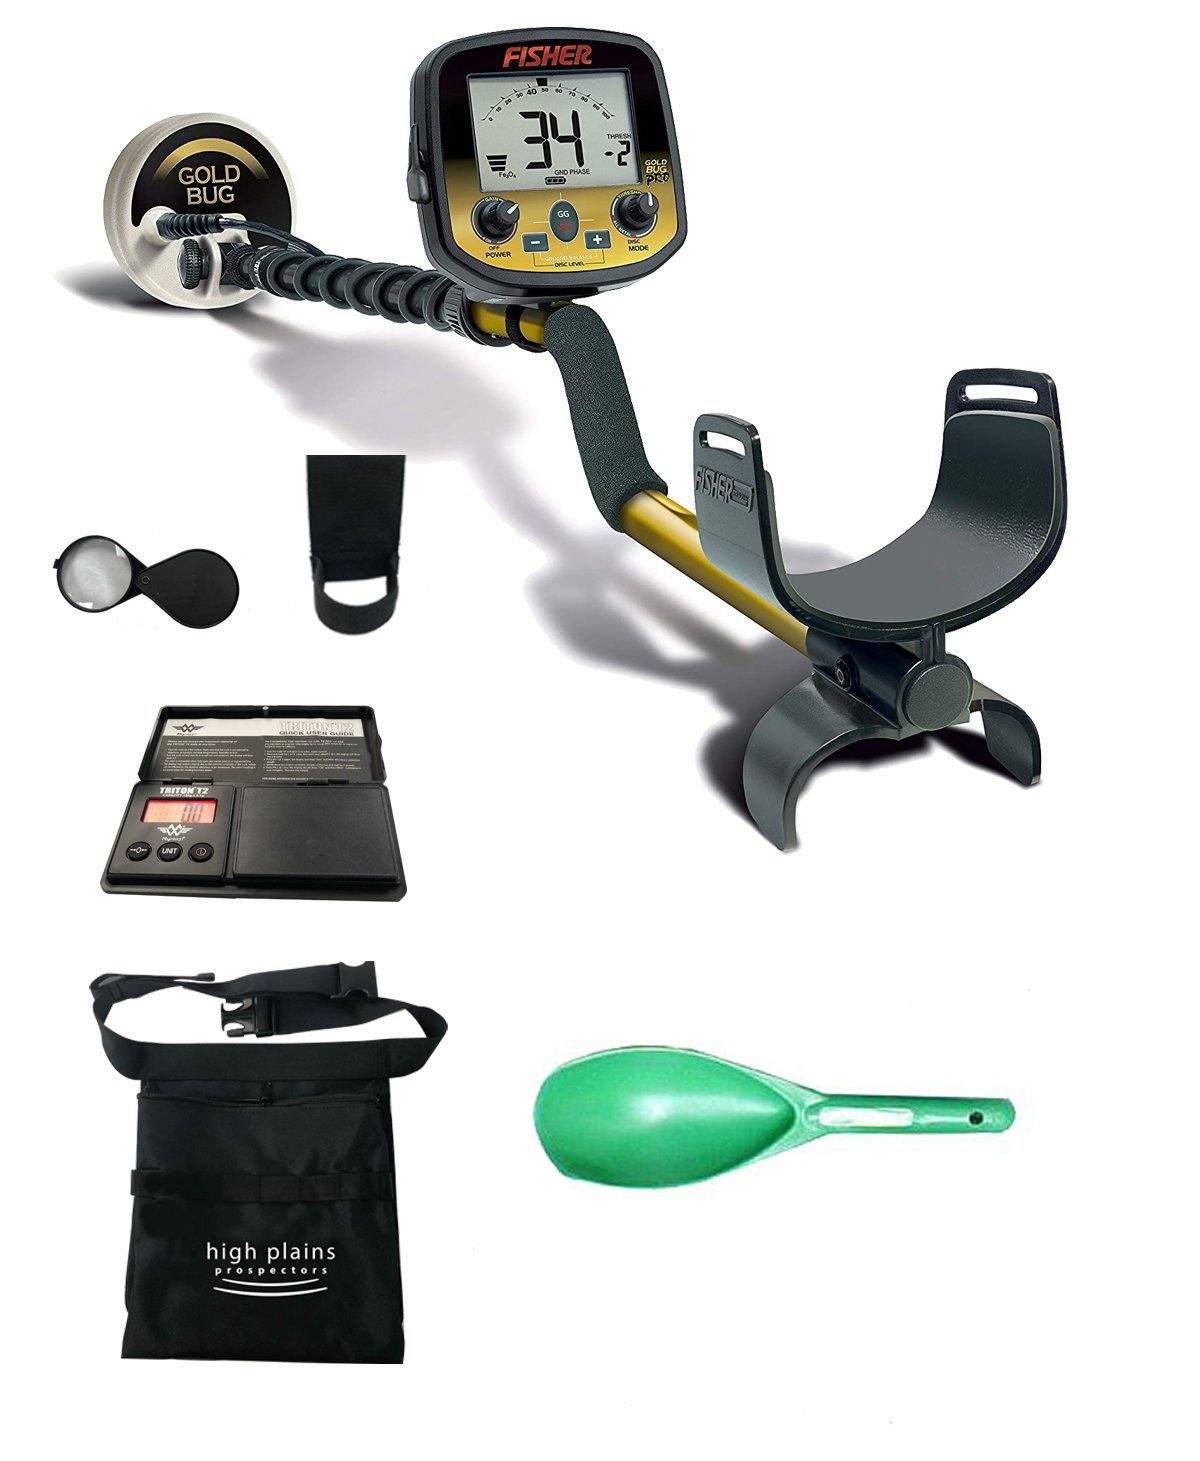 Fisher Gold Bug Pro Metal Detector Bundle with Gear